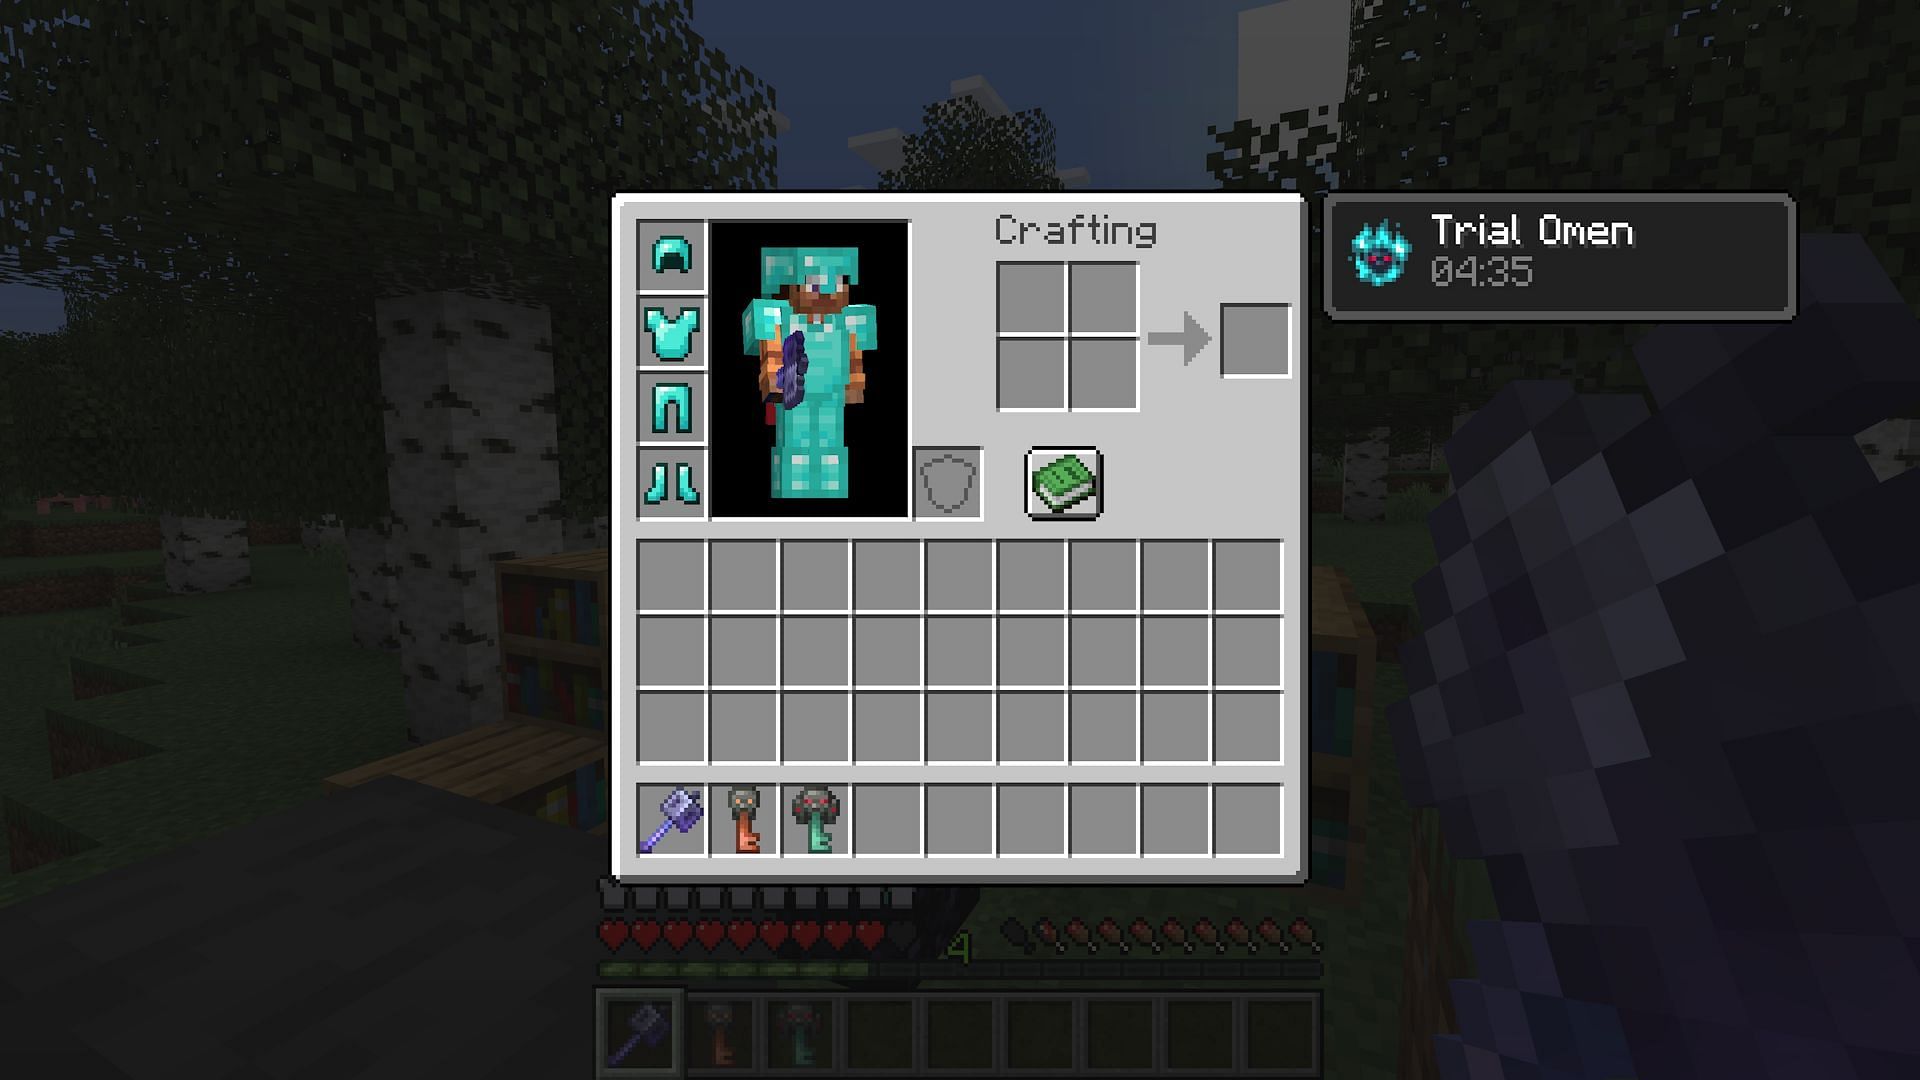 The trial omen effect starts trial events (Image via Mojang)